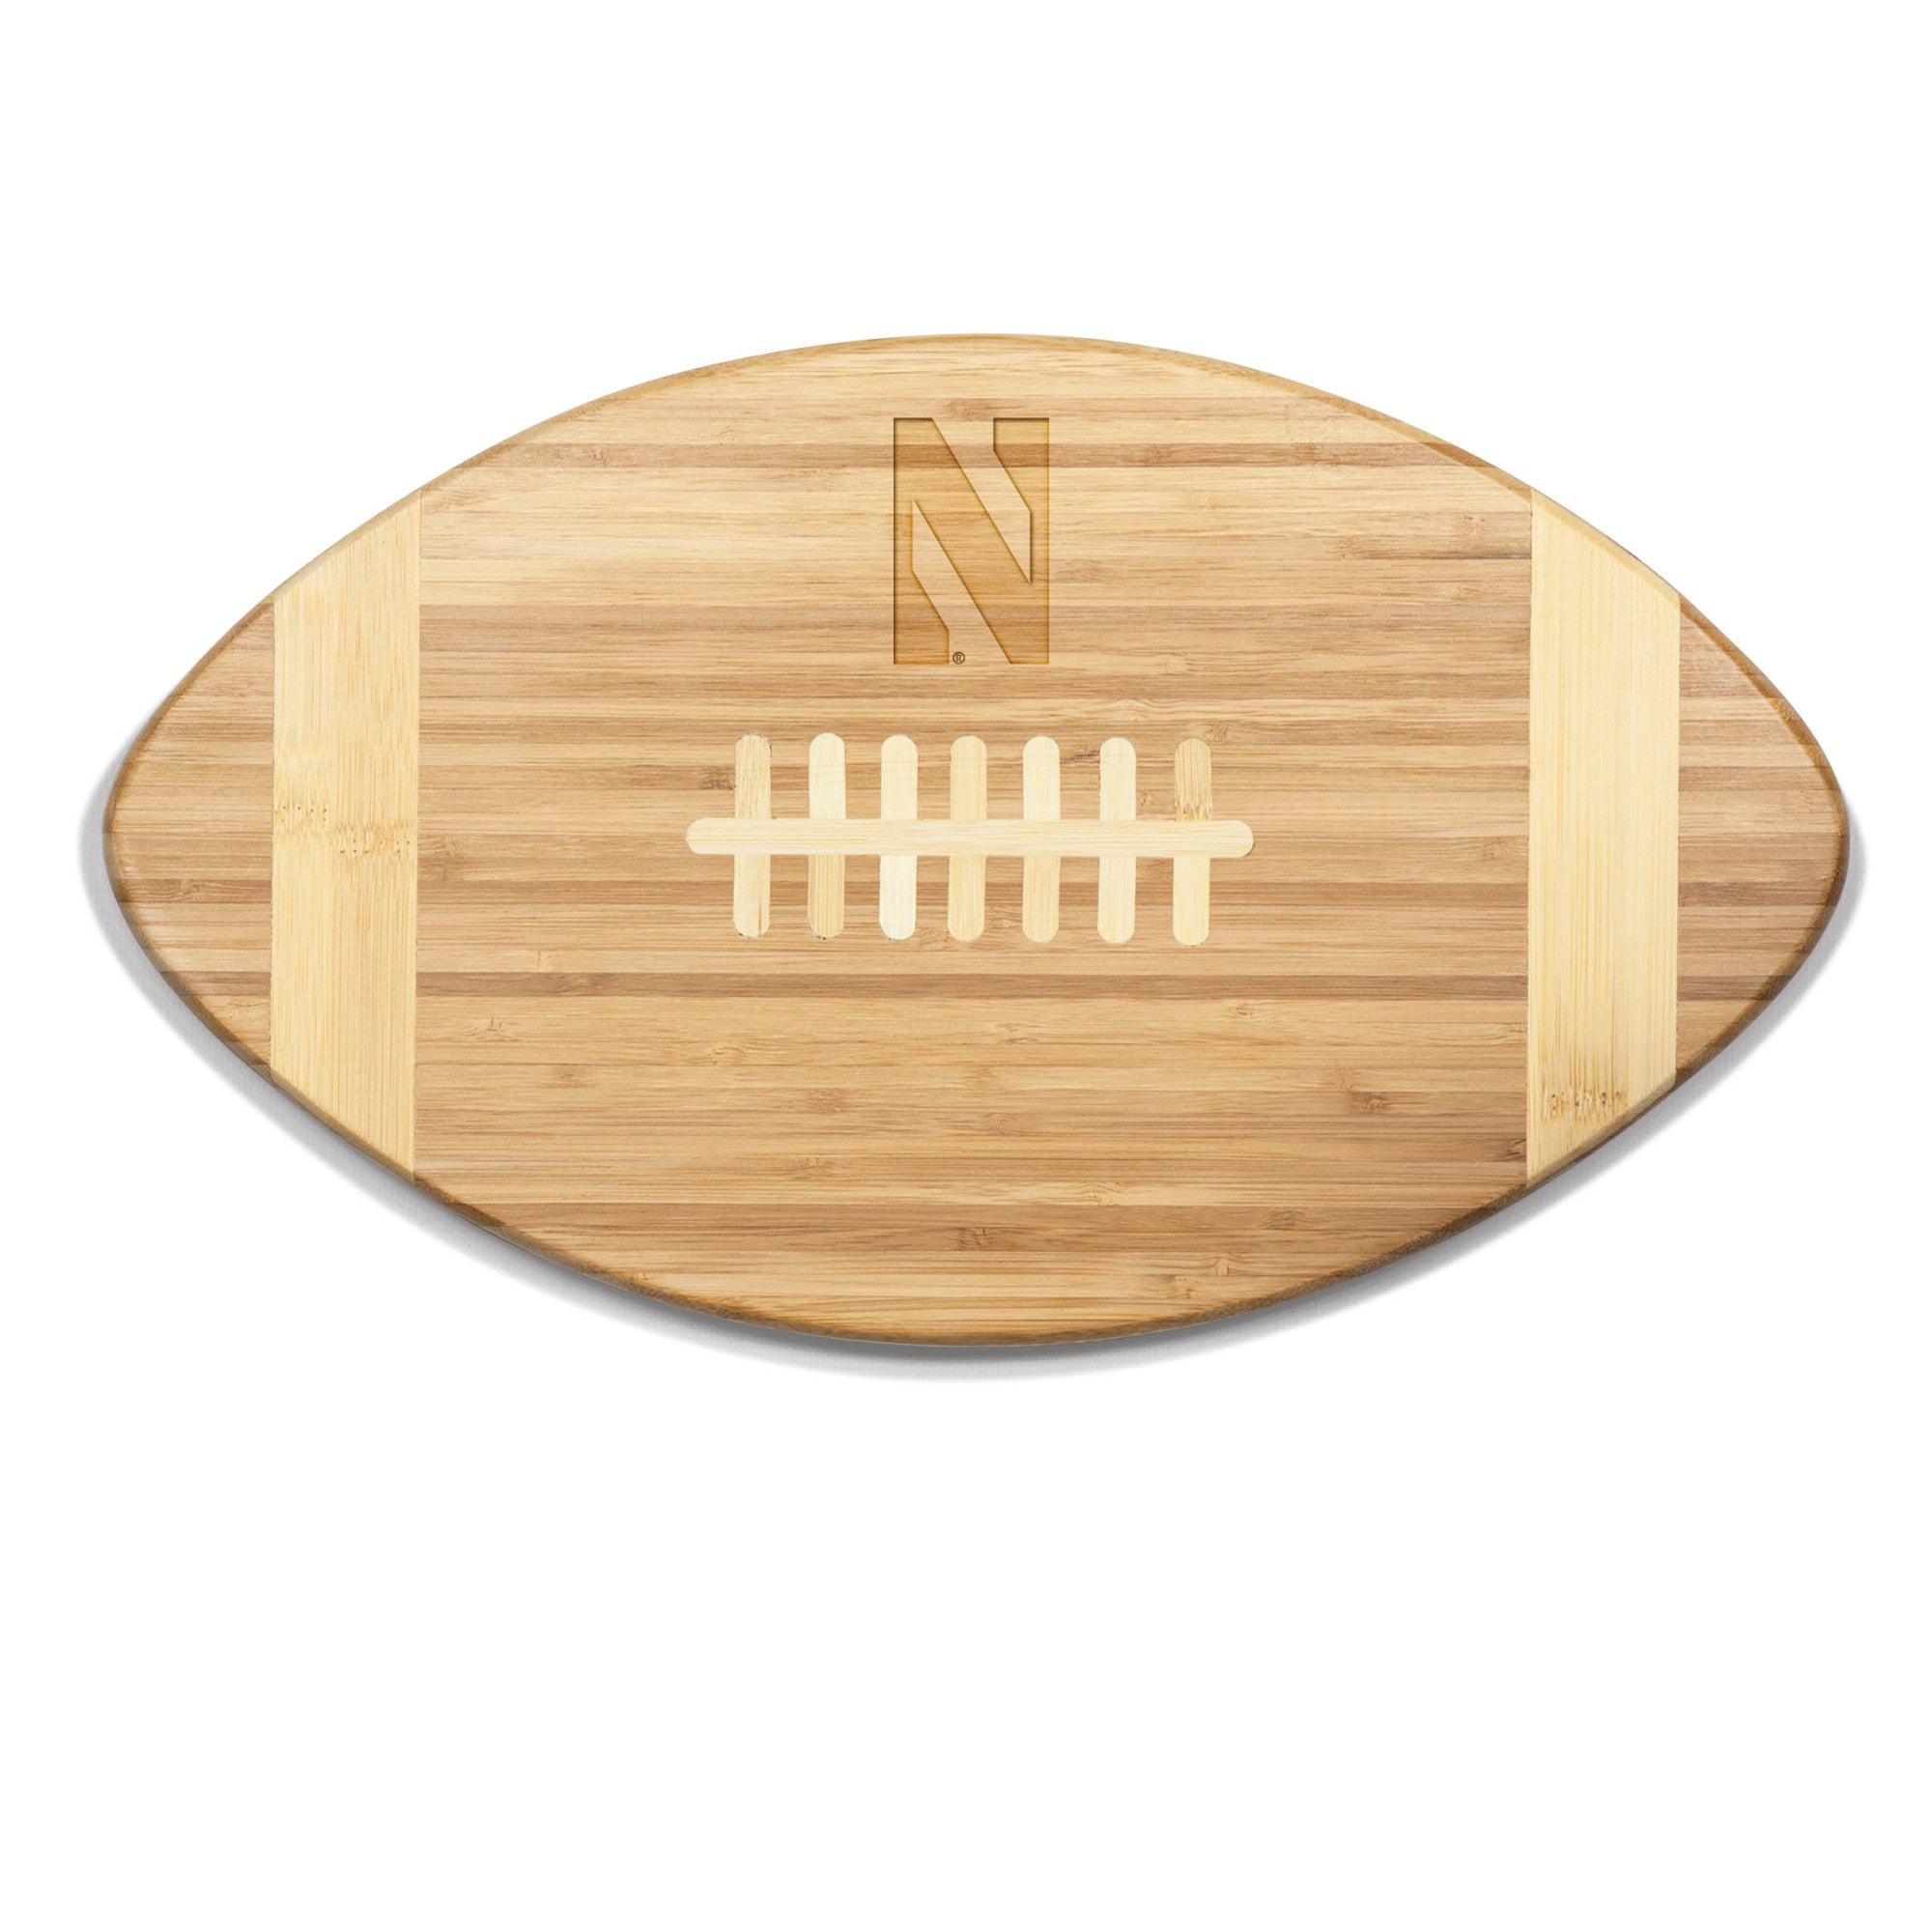 Northwestern Wildcats - Touchdown! Football Cutting Board & Serving Tray